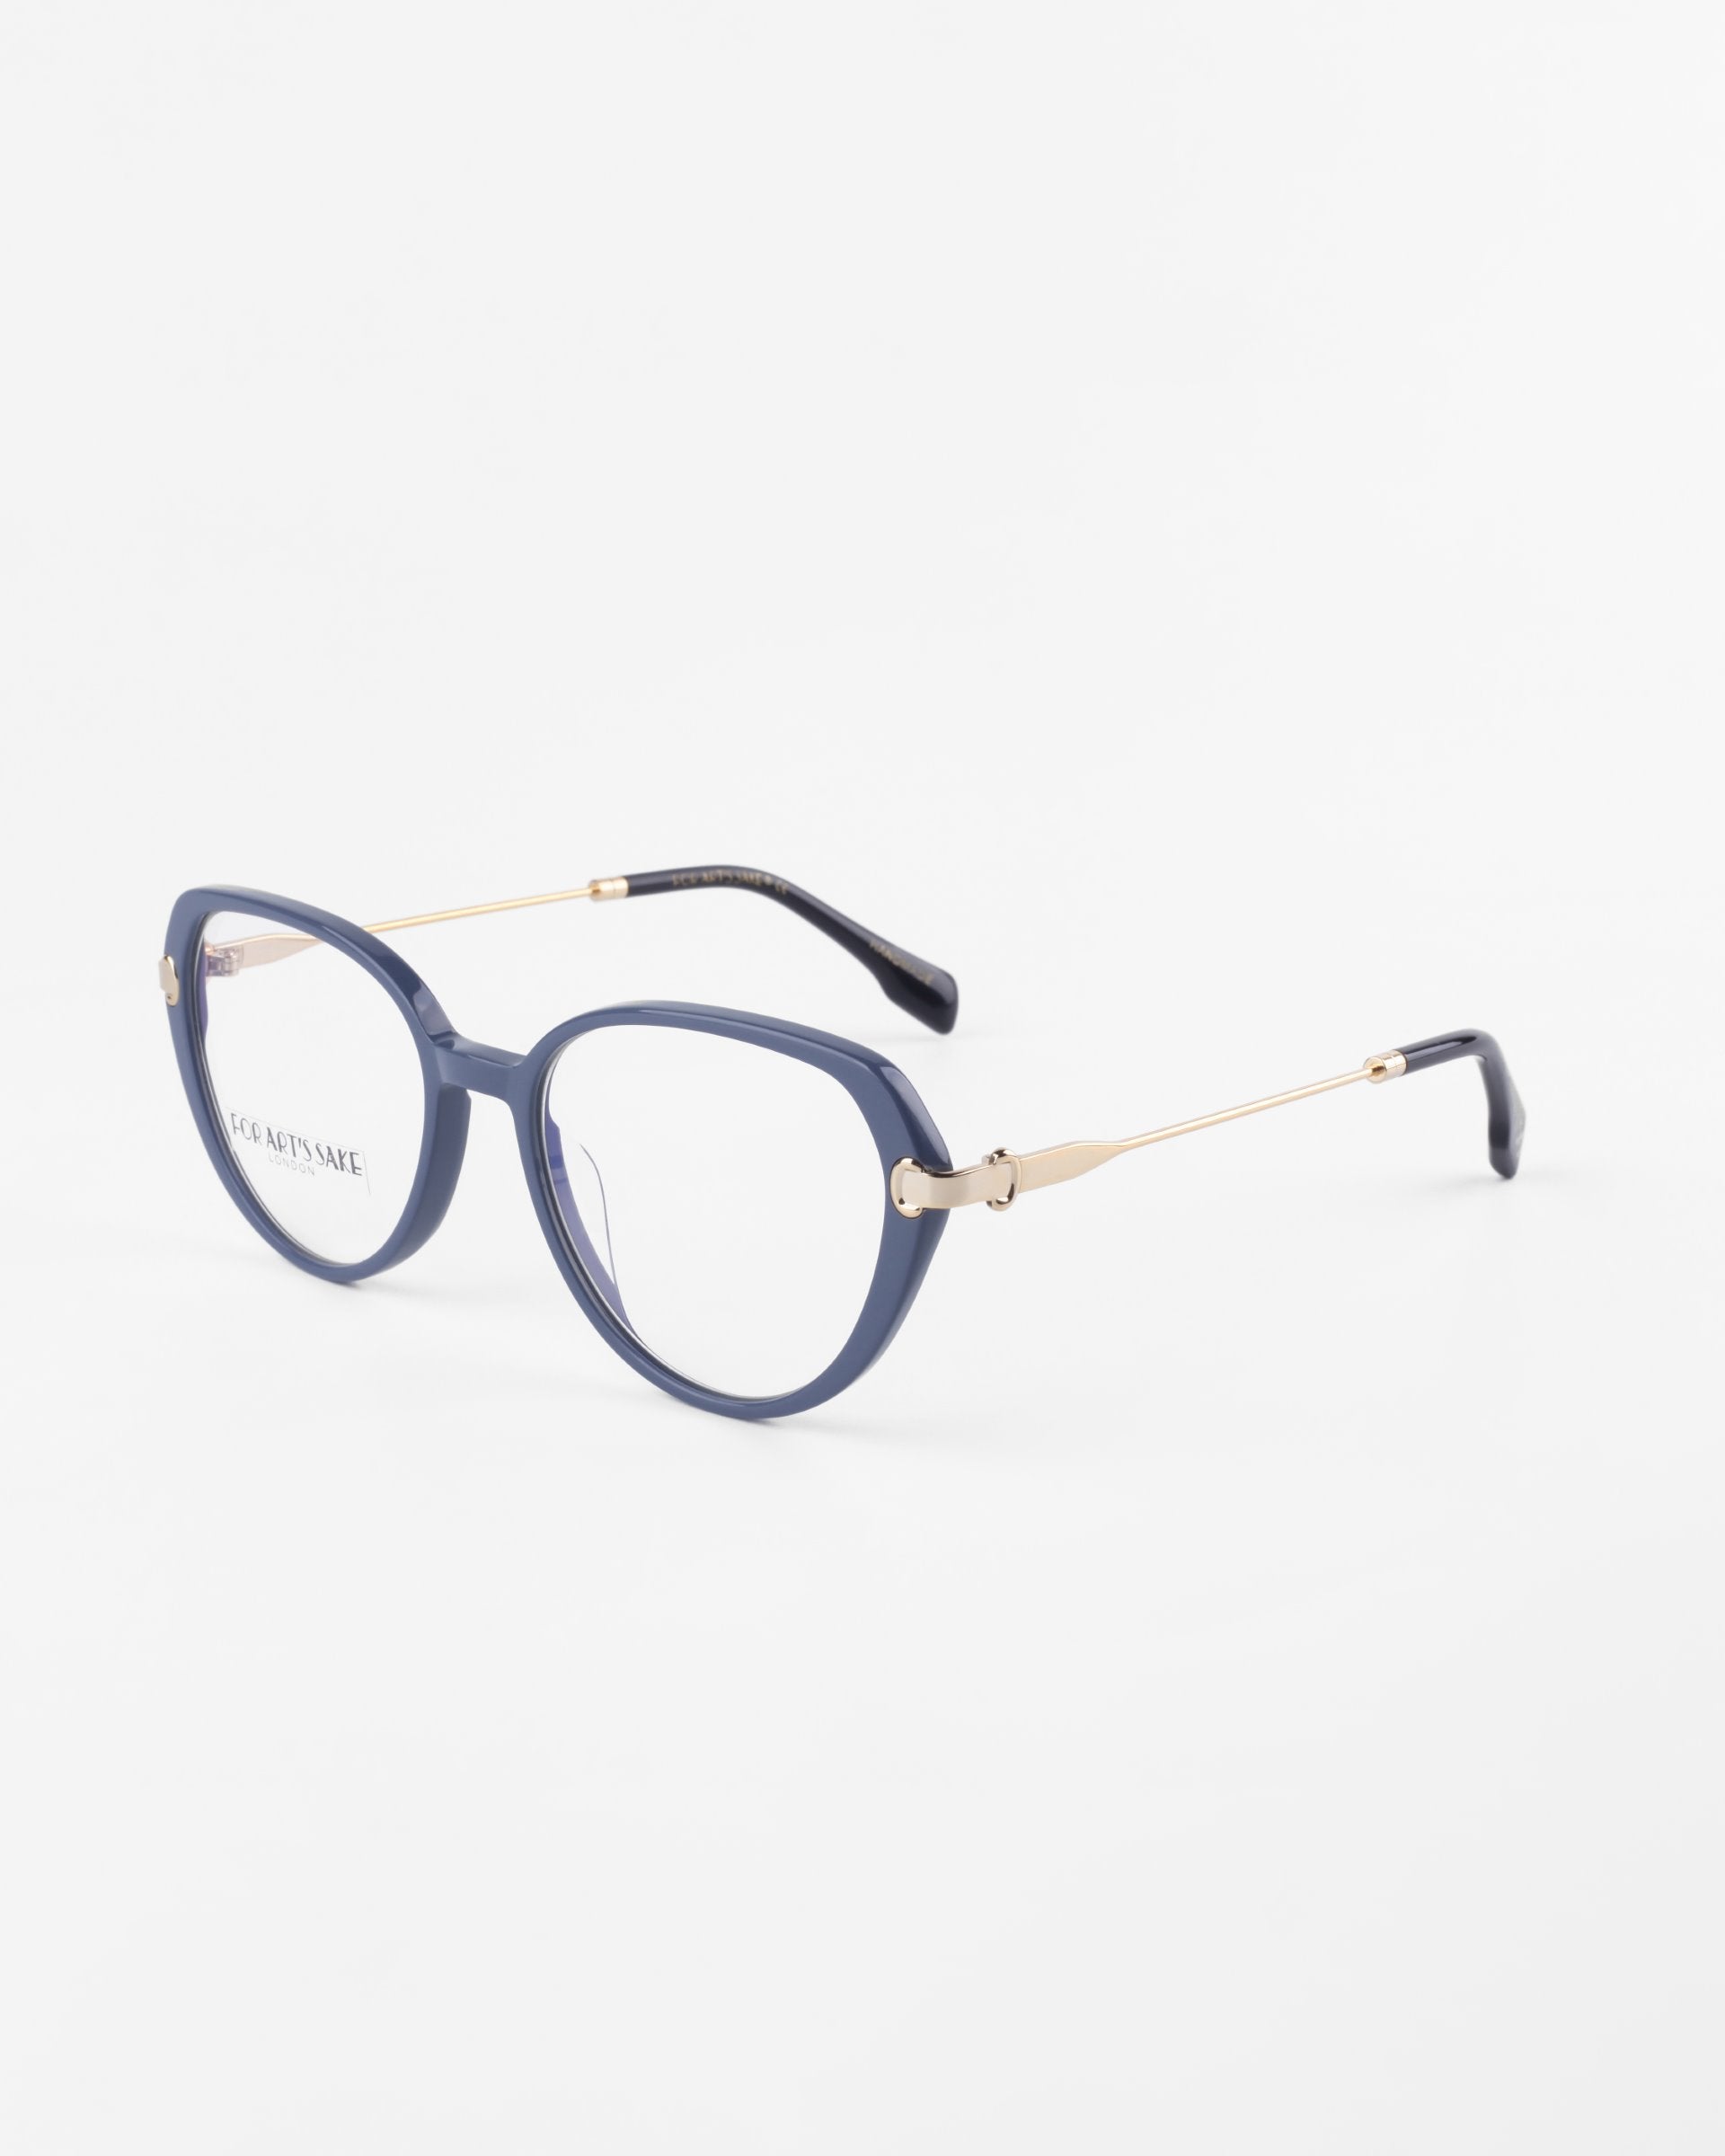 A pair of Waterhouse eyeglasses by For Art's Sake® with rounded grayish-blue frames, thin 18-karat gold-plated temples, and black ear tips. The glasses have clear prescription lenses and are positioned on a white background.